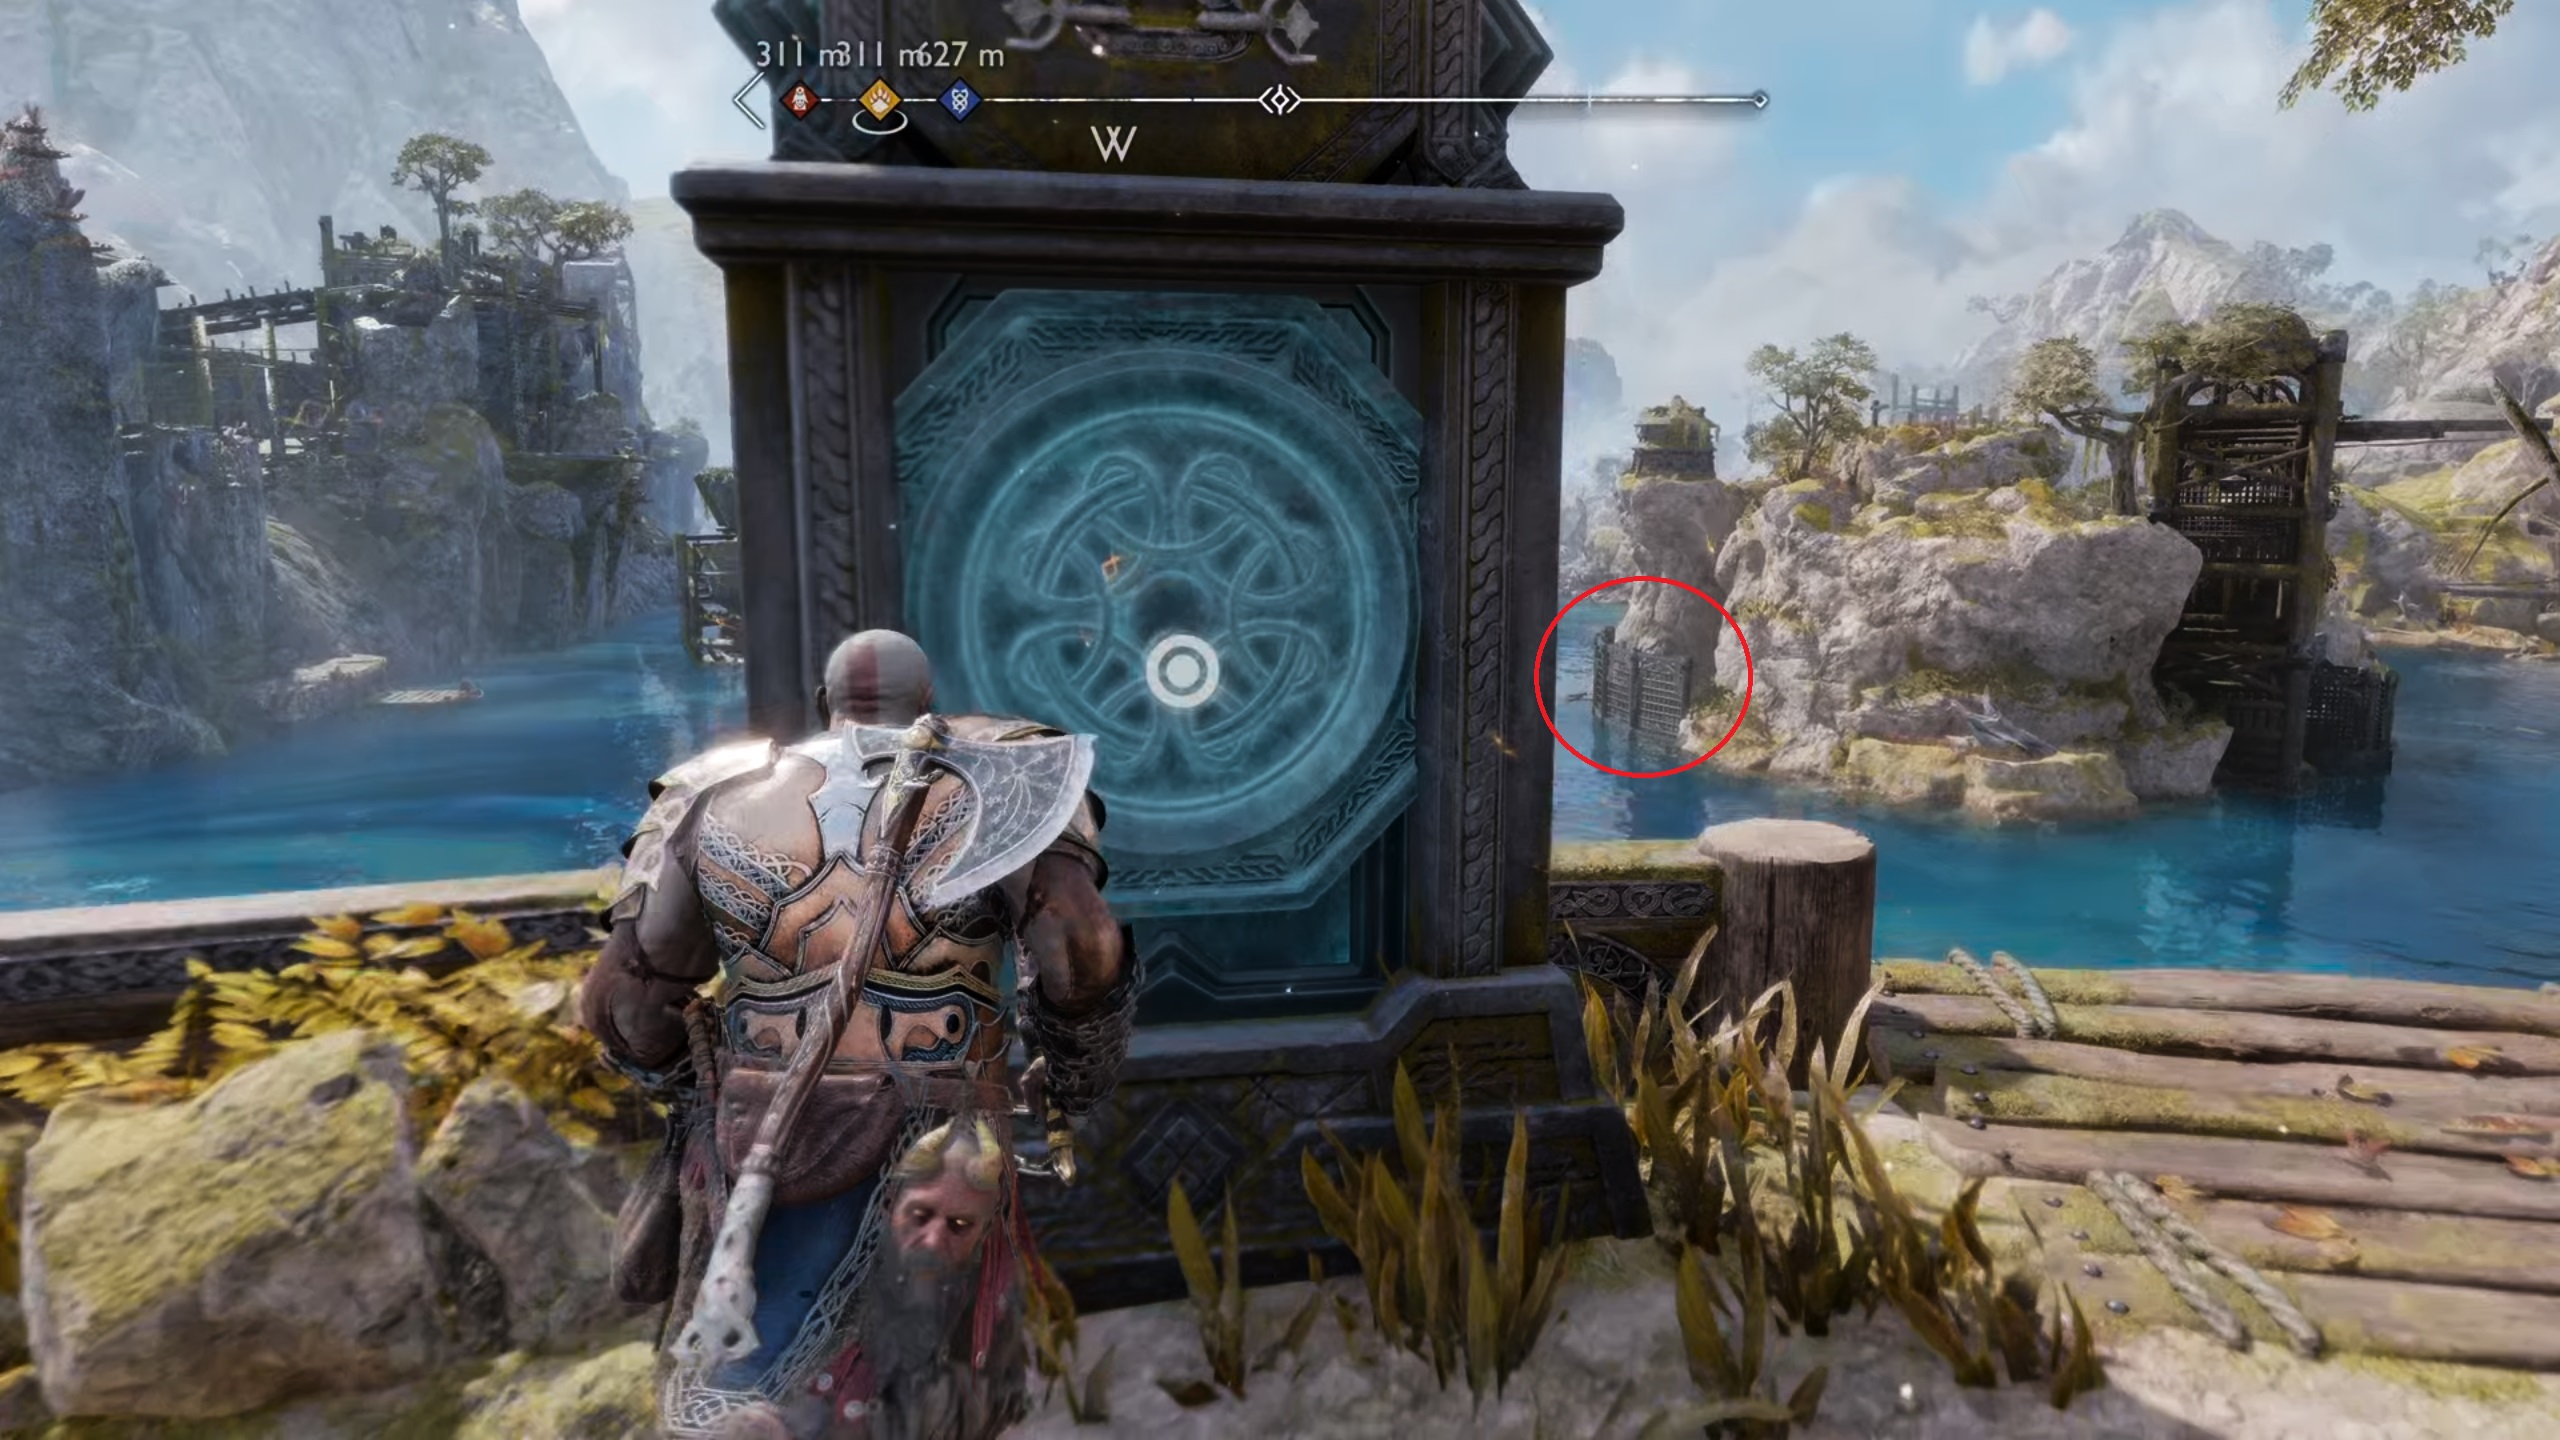 You can interact with this rune slate to open the gate in the water once you have the Draupnir Spear.